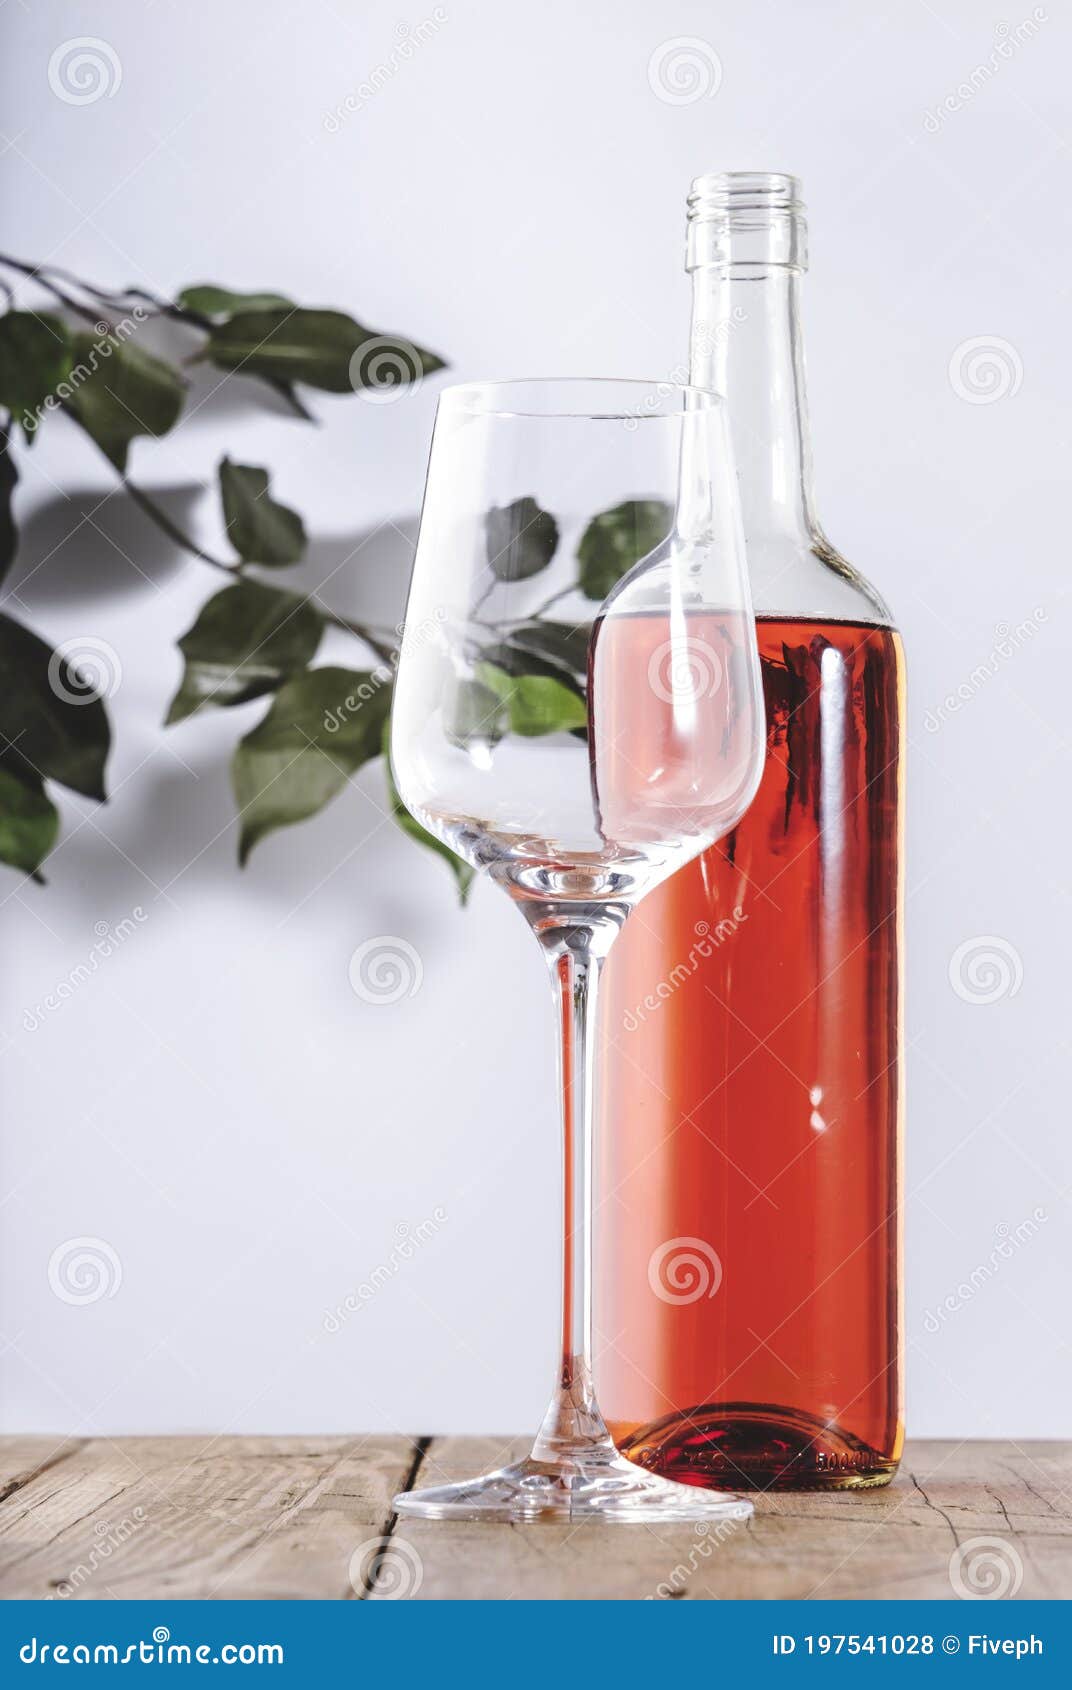 rose wine glass with bottle on the white table. rosado, rosato or blush wine tasting in wineshop, bar concept. copy space